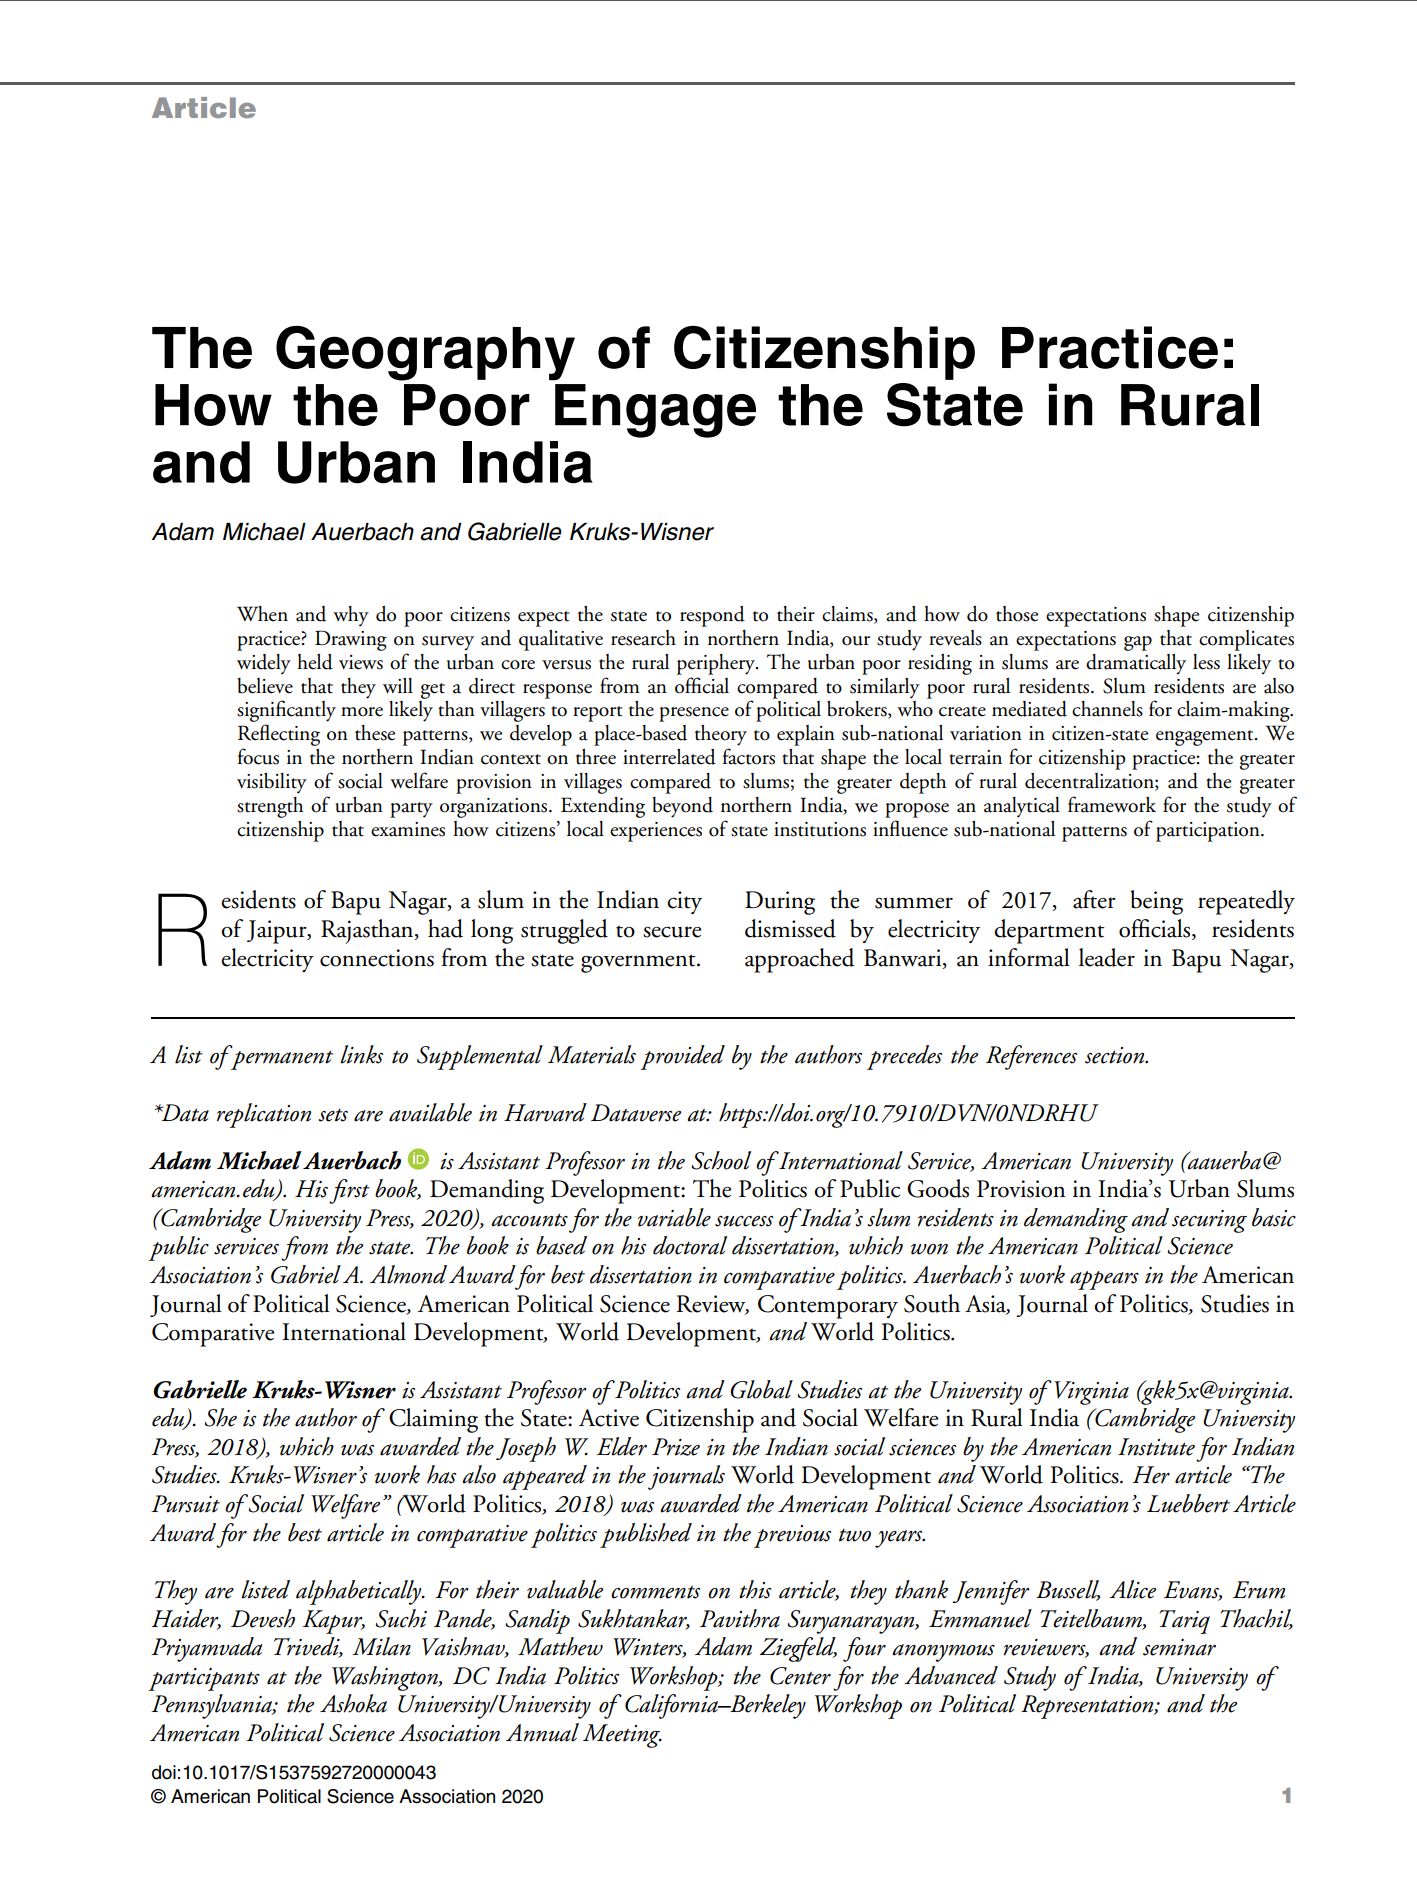 The Geography of Citizenship Practice: How the Poor Engage the State in Rural and Urban India (with A. M. Auerbach)